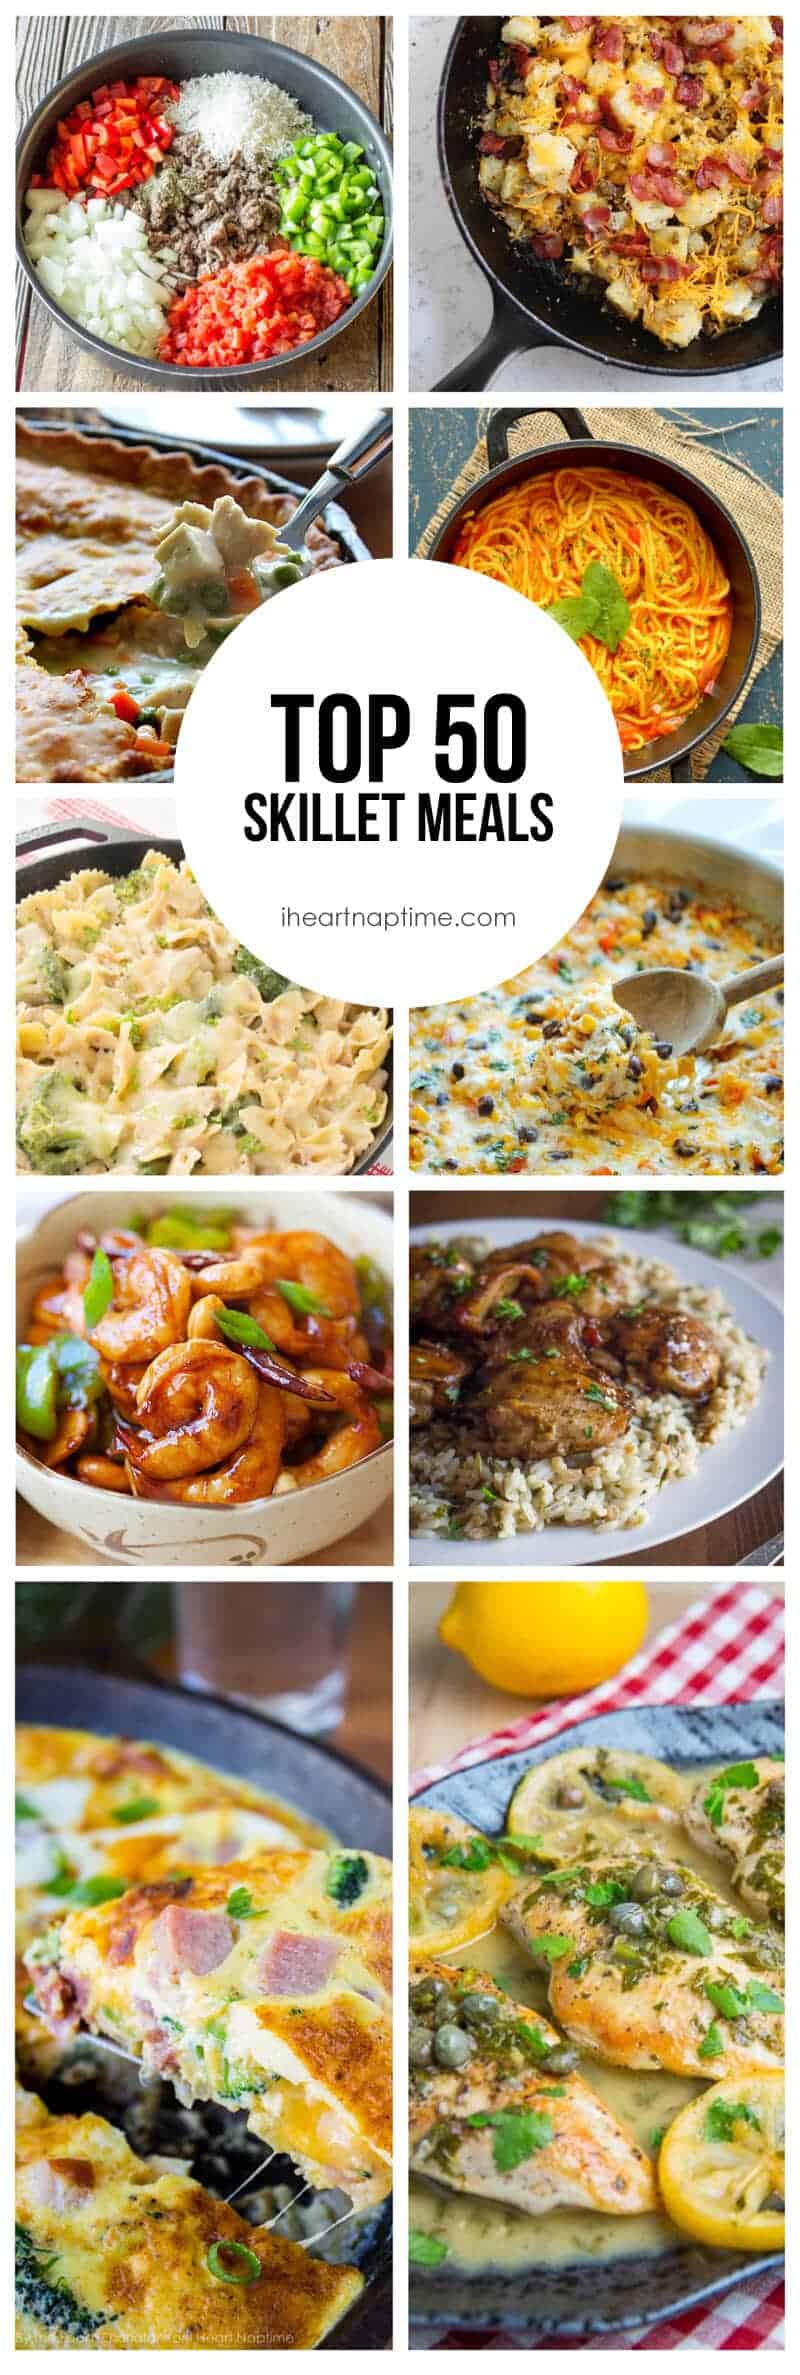 Top 50 Skillet Meals on iheartnaptime.com -recipes that can be all in one pot! 